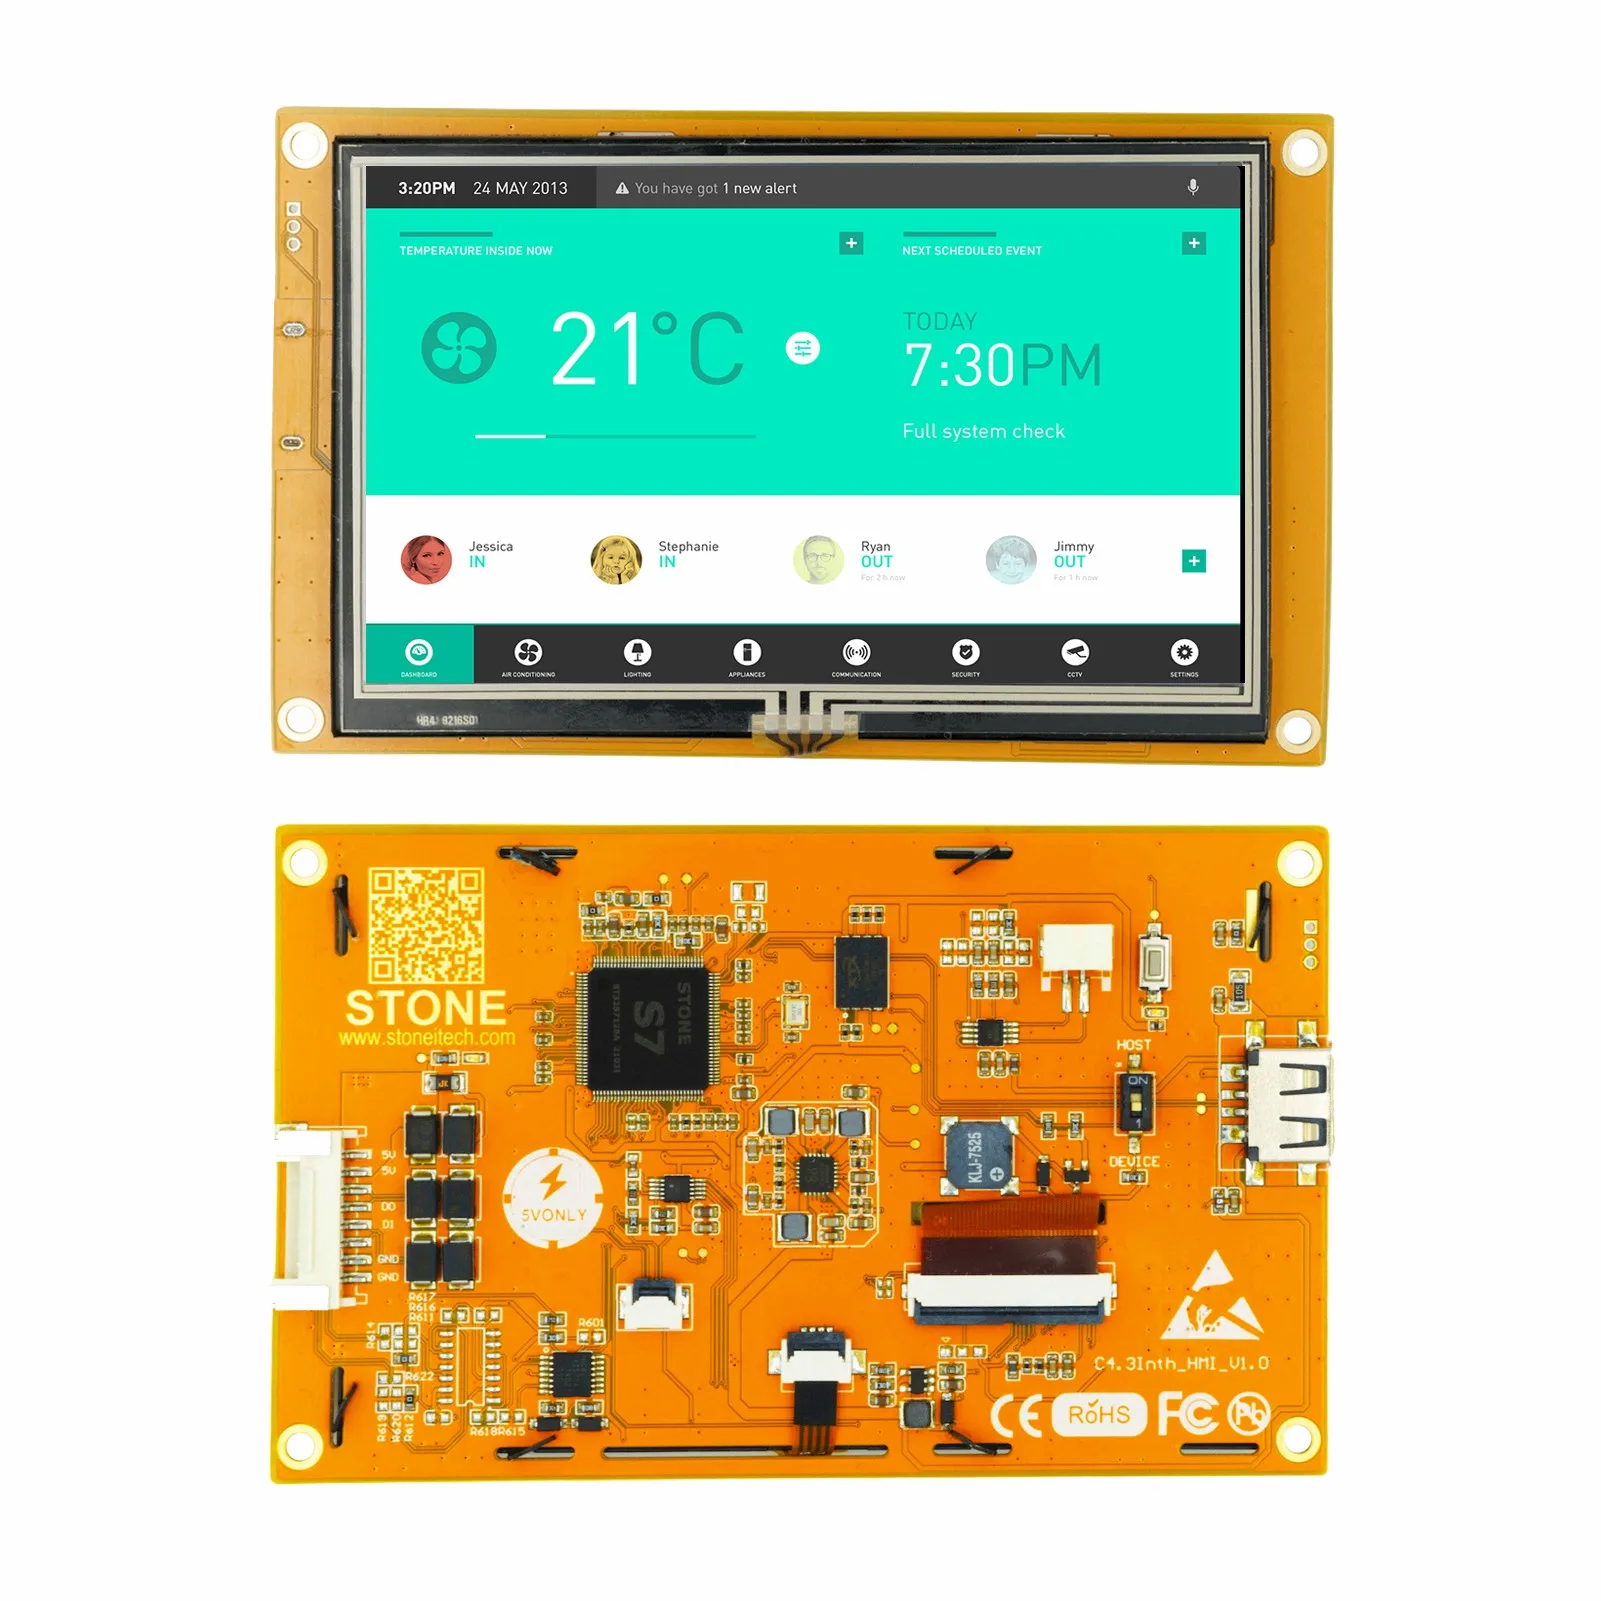 Stone  4.3 inch TFT LCD Module ANY MCU via Simple Powerful Command Set 128MB of flash memory for HMI projects